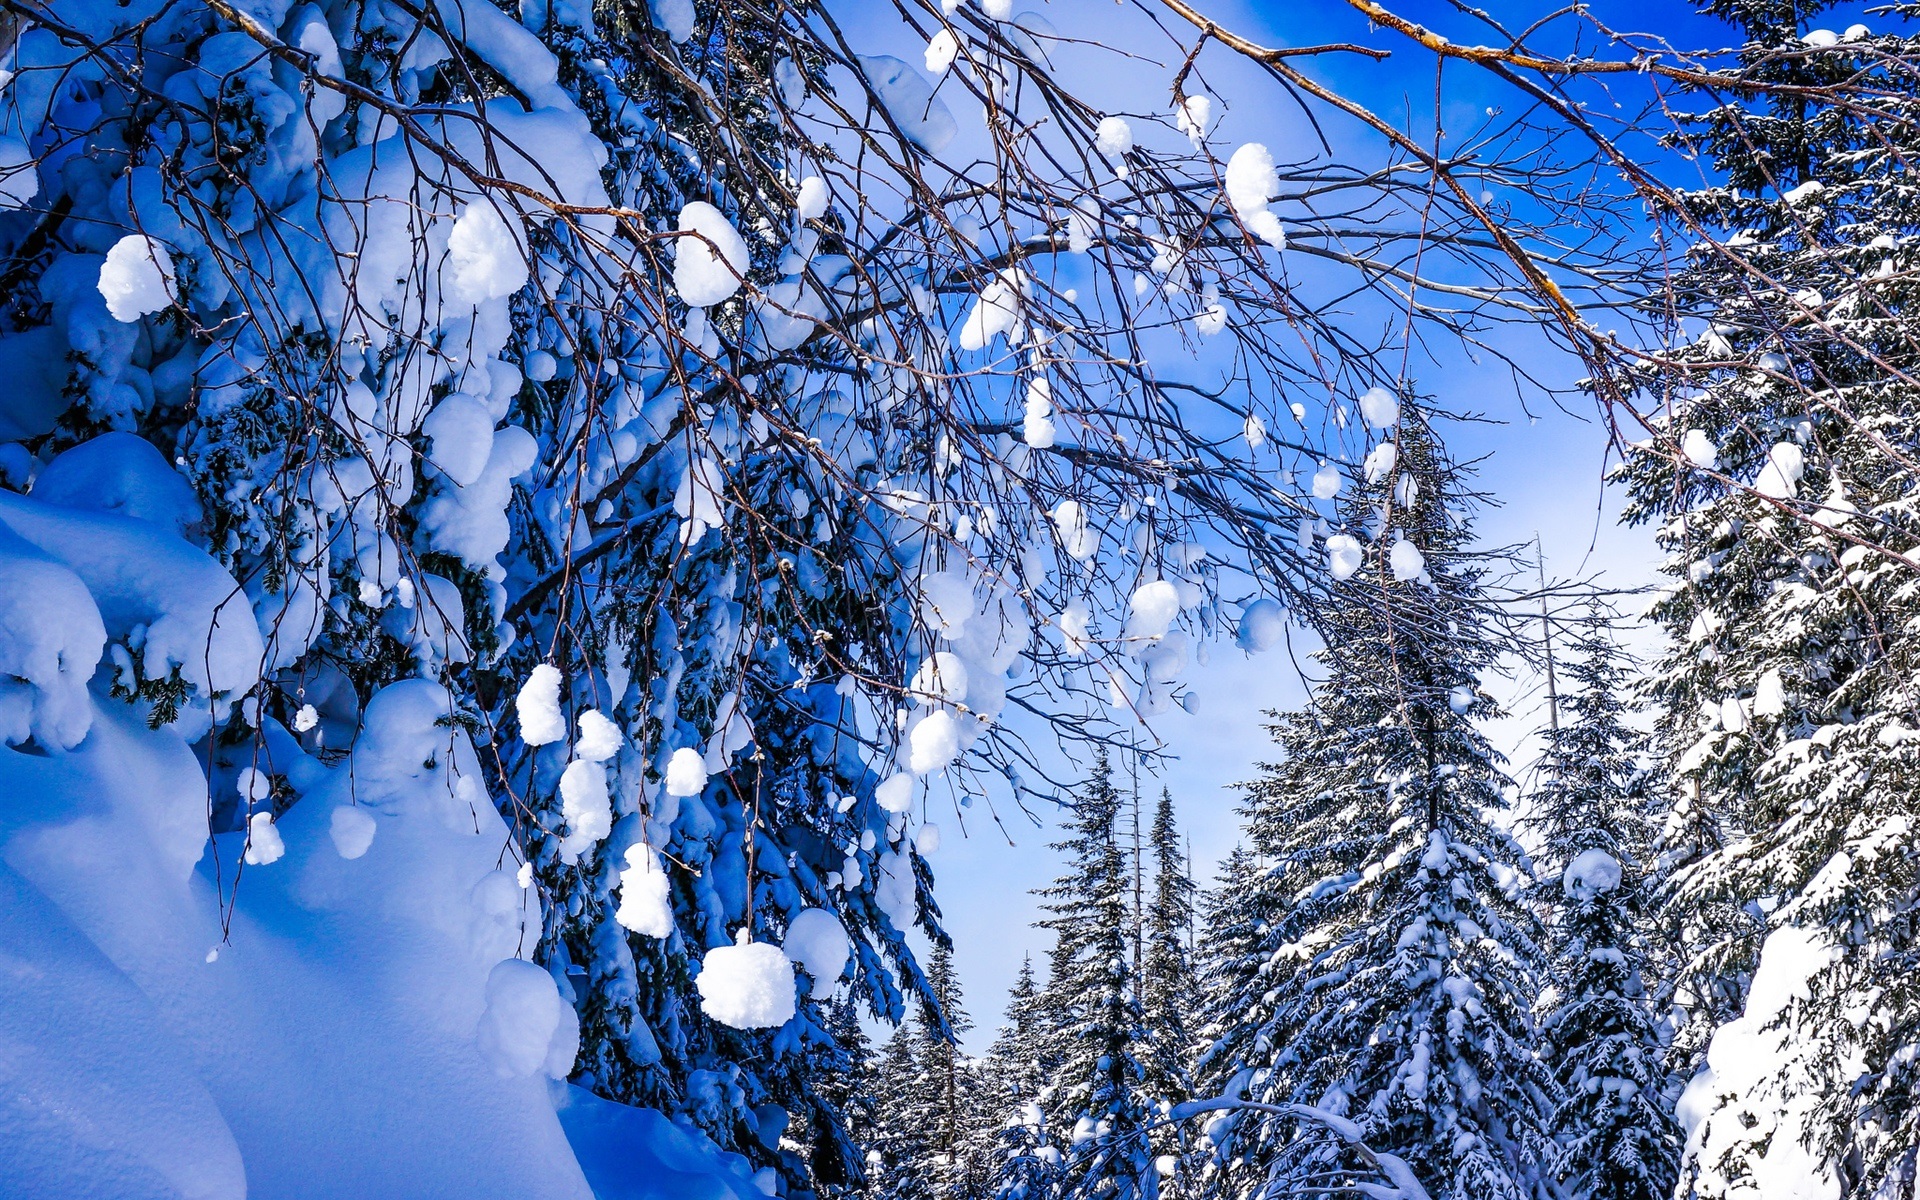 khabarovsk territory russia beautiful winter snow forest trees